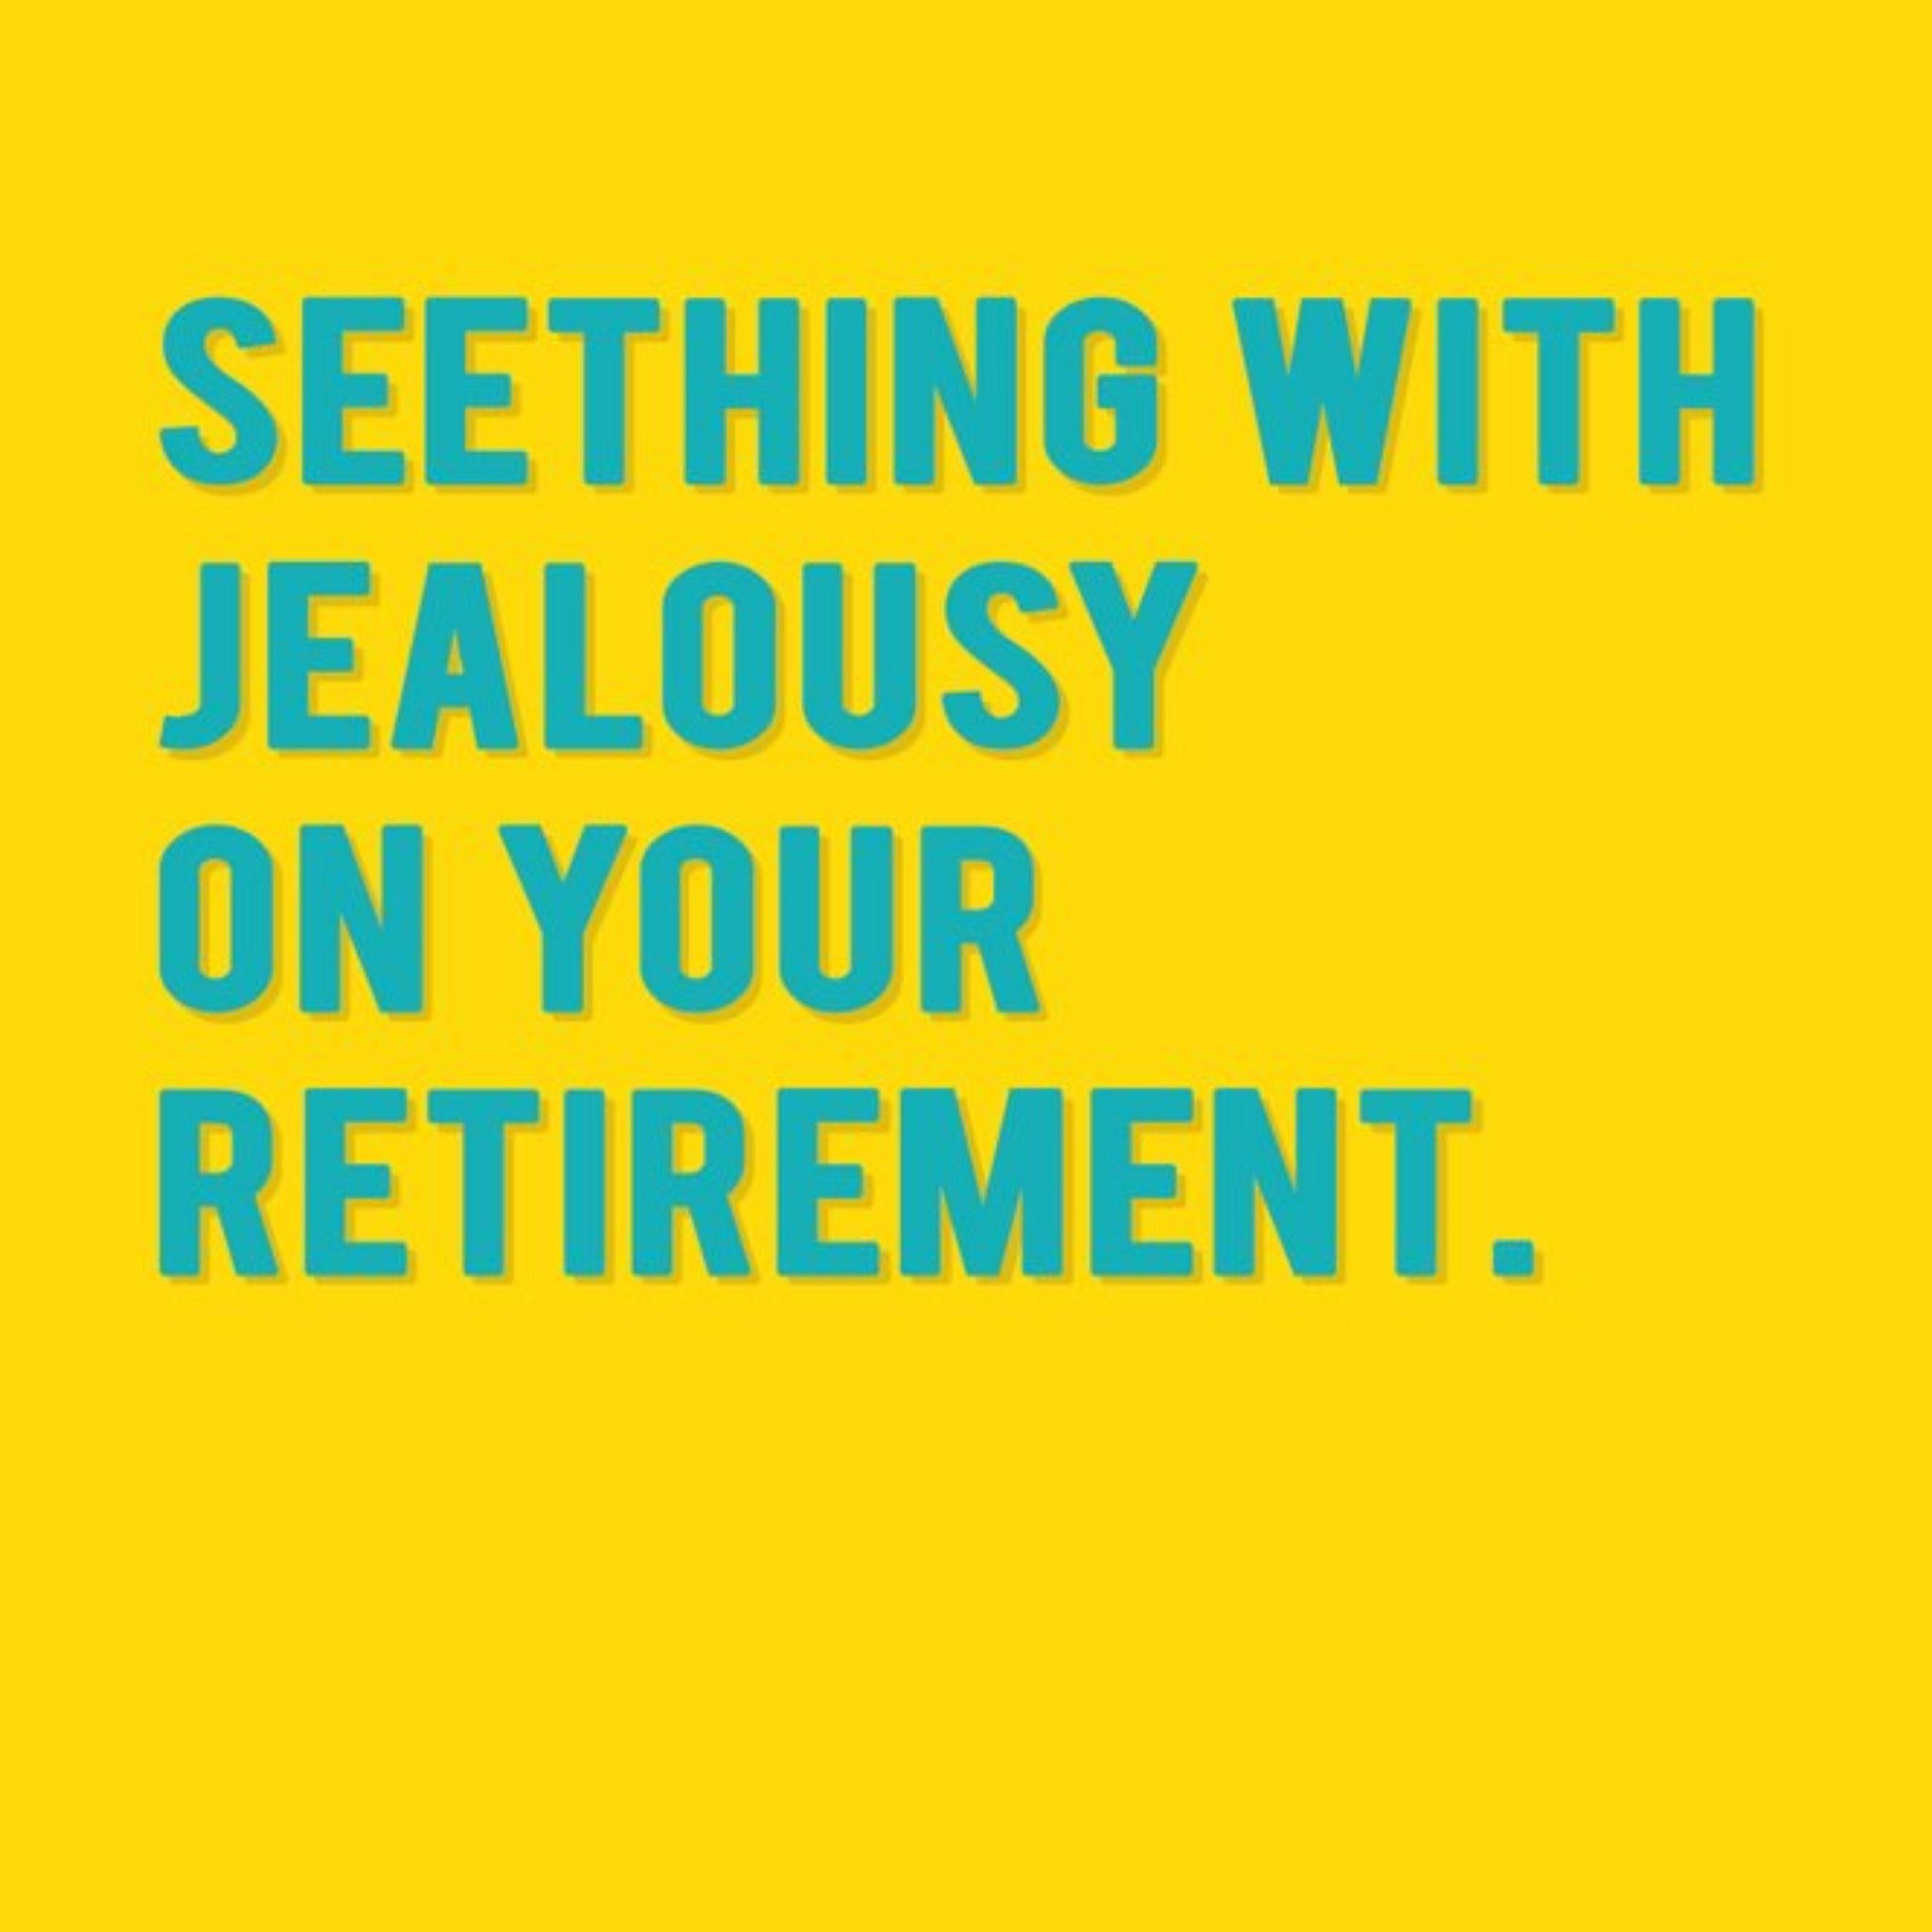 Moonpig Modern Typographical Seething With Jealousy On Your Retirement Card, Square